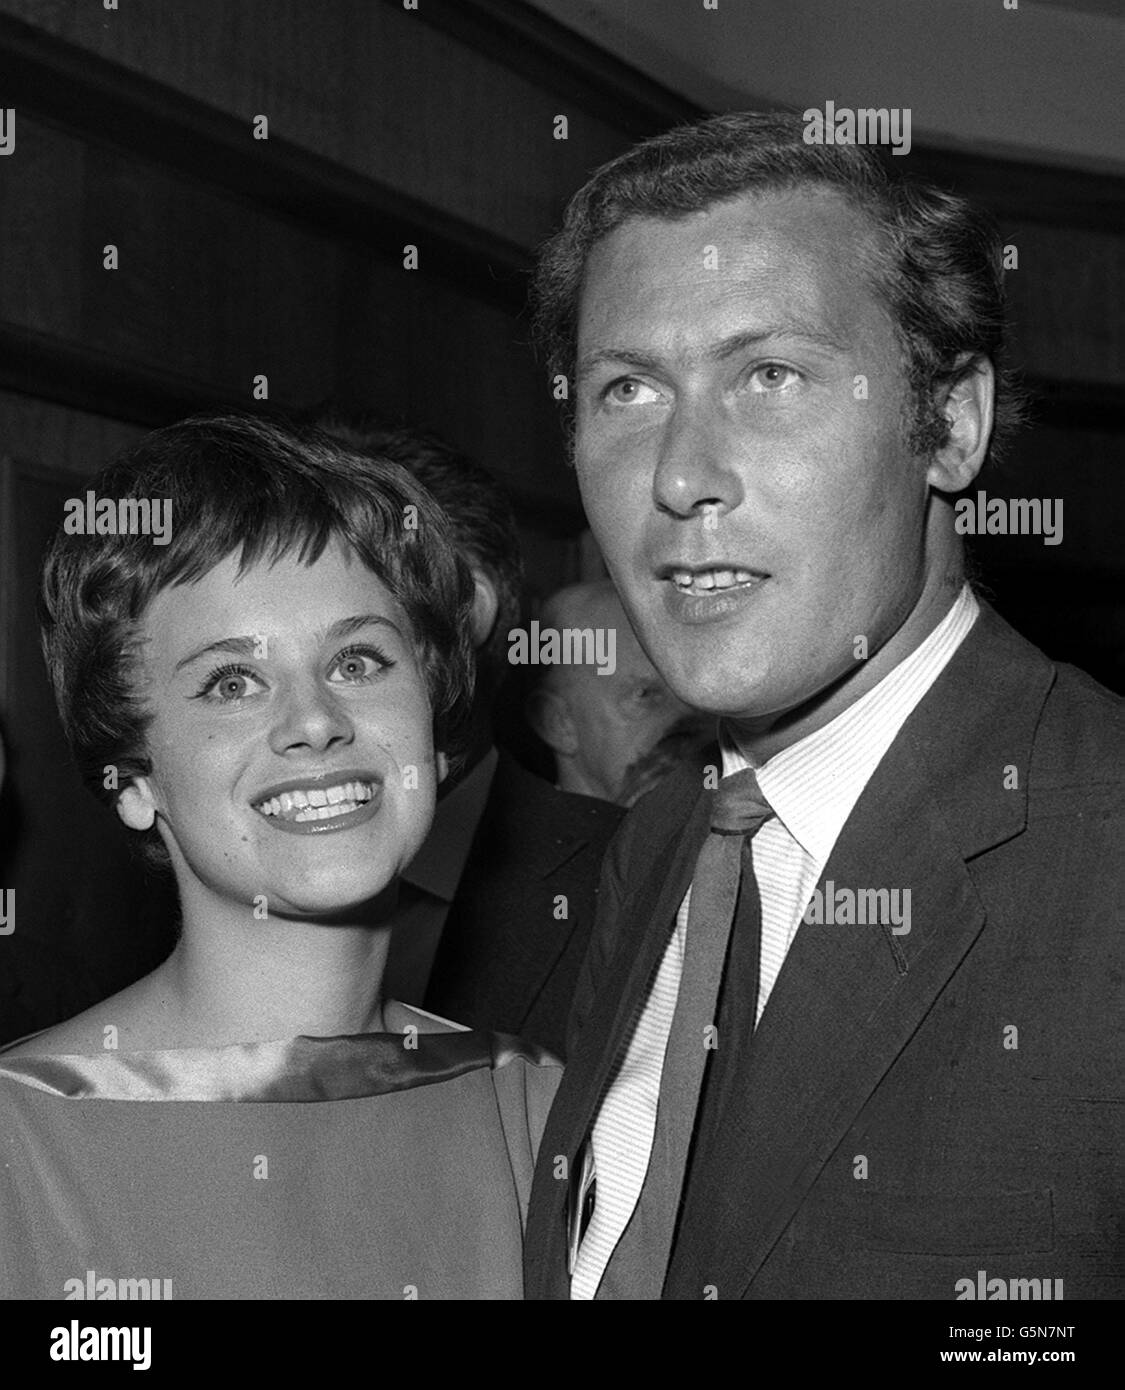 Playright John Osborne with actress Rita Tushingham, the former 1-a-week trainee from Liverpool 'rep' who takes the lead role in the film version of Shelagh Delaney's 'A Taste Of Honey' at the Leicester Square Theatre, London. The film is from Osbourne's Woddfall Company. Stock Photo